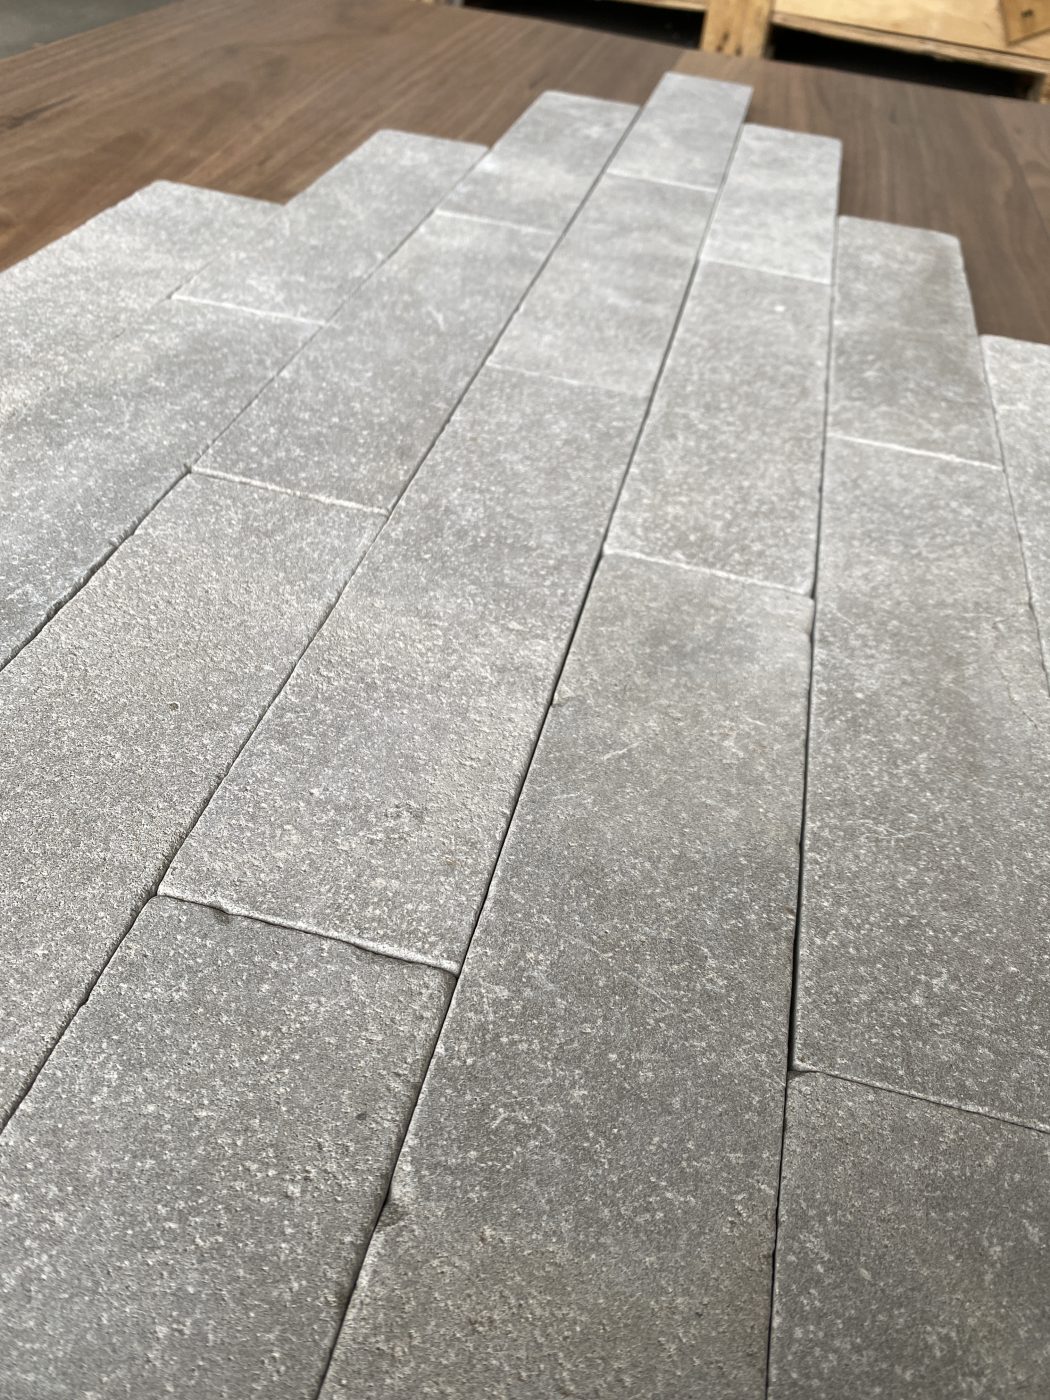 MADDISON-SANDBLASTED-TUMBLED-LIMESTONE-BATTONS_RMS-TRADERS_NATURAL-STONE-PAVER-SUPPLIER-MELBOURNE-17-scaled